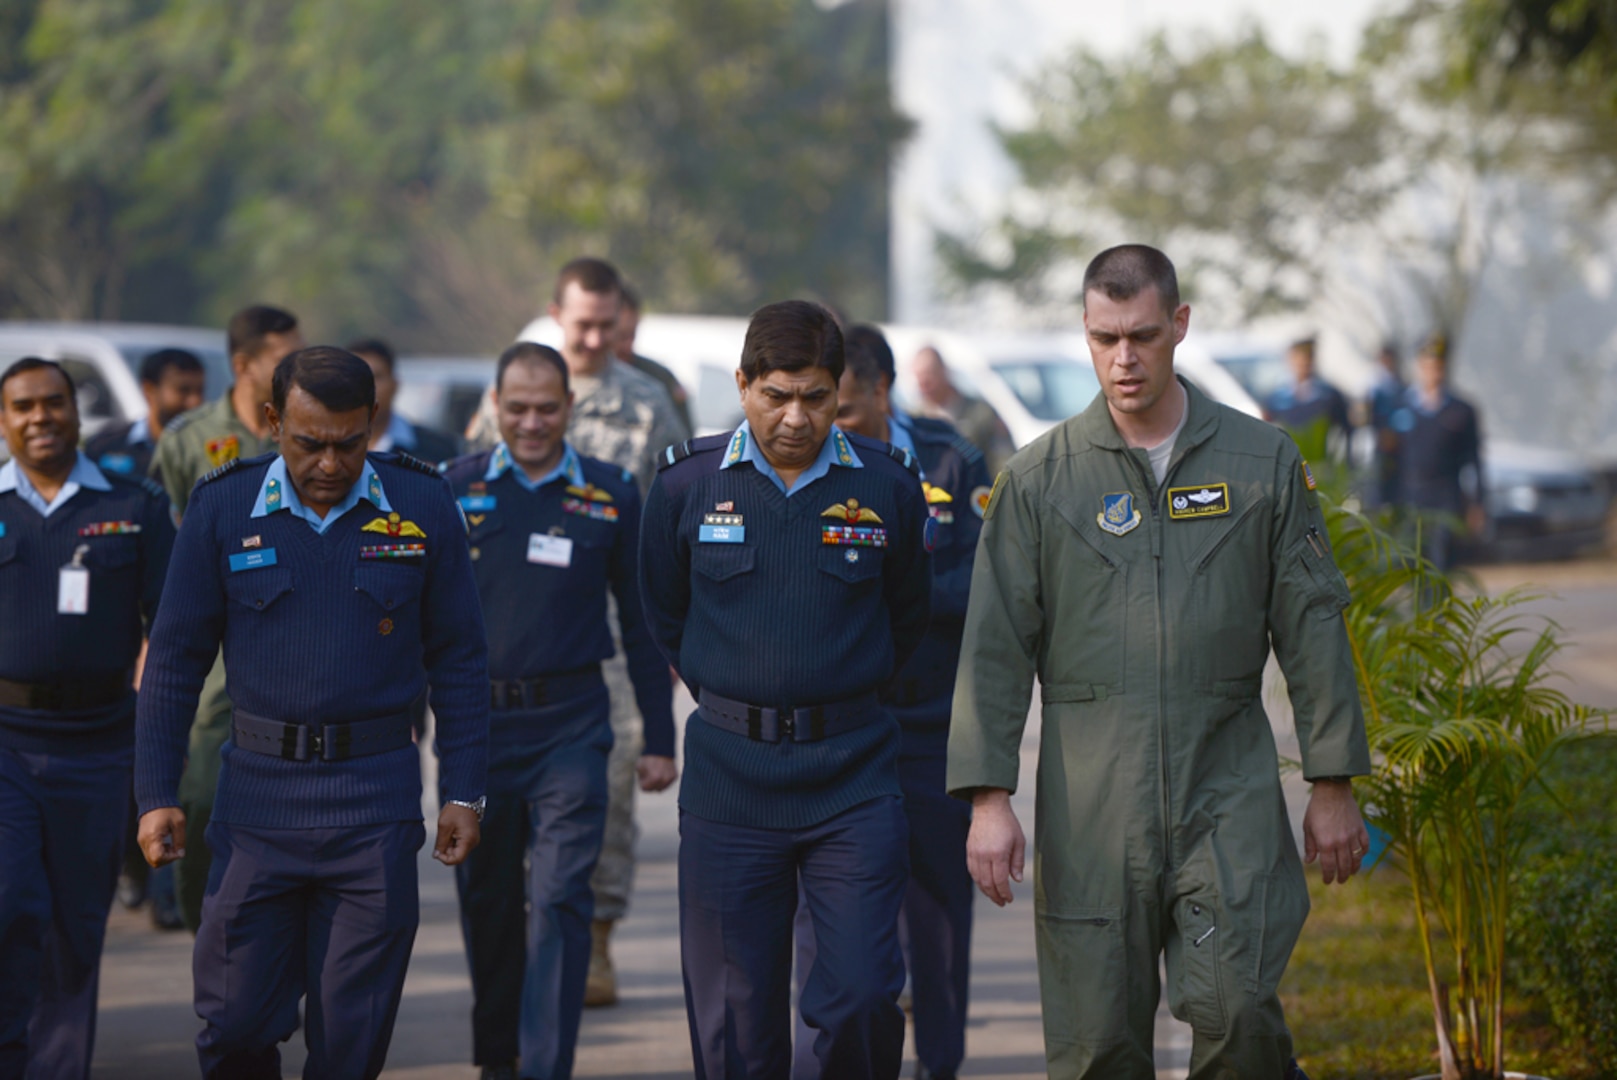 BAF BASE BANGABANDHU, Bangladesh (Jan. 24, 2015) - Lt. Col. Andrew Campbell, right, 36th Airlift Squadron commander, talks with Bangladesh air force Air Vice Marshal M. Naim Hassan during Exercise Cope South. Cope South helps cultivate common bonds, foster goodwill and improve readiness and compatibility between members of the Bangladesh and U.S. Air Forces. 